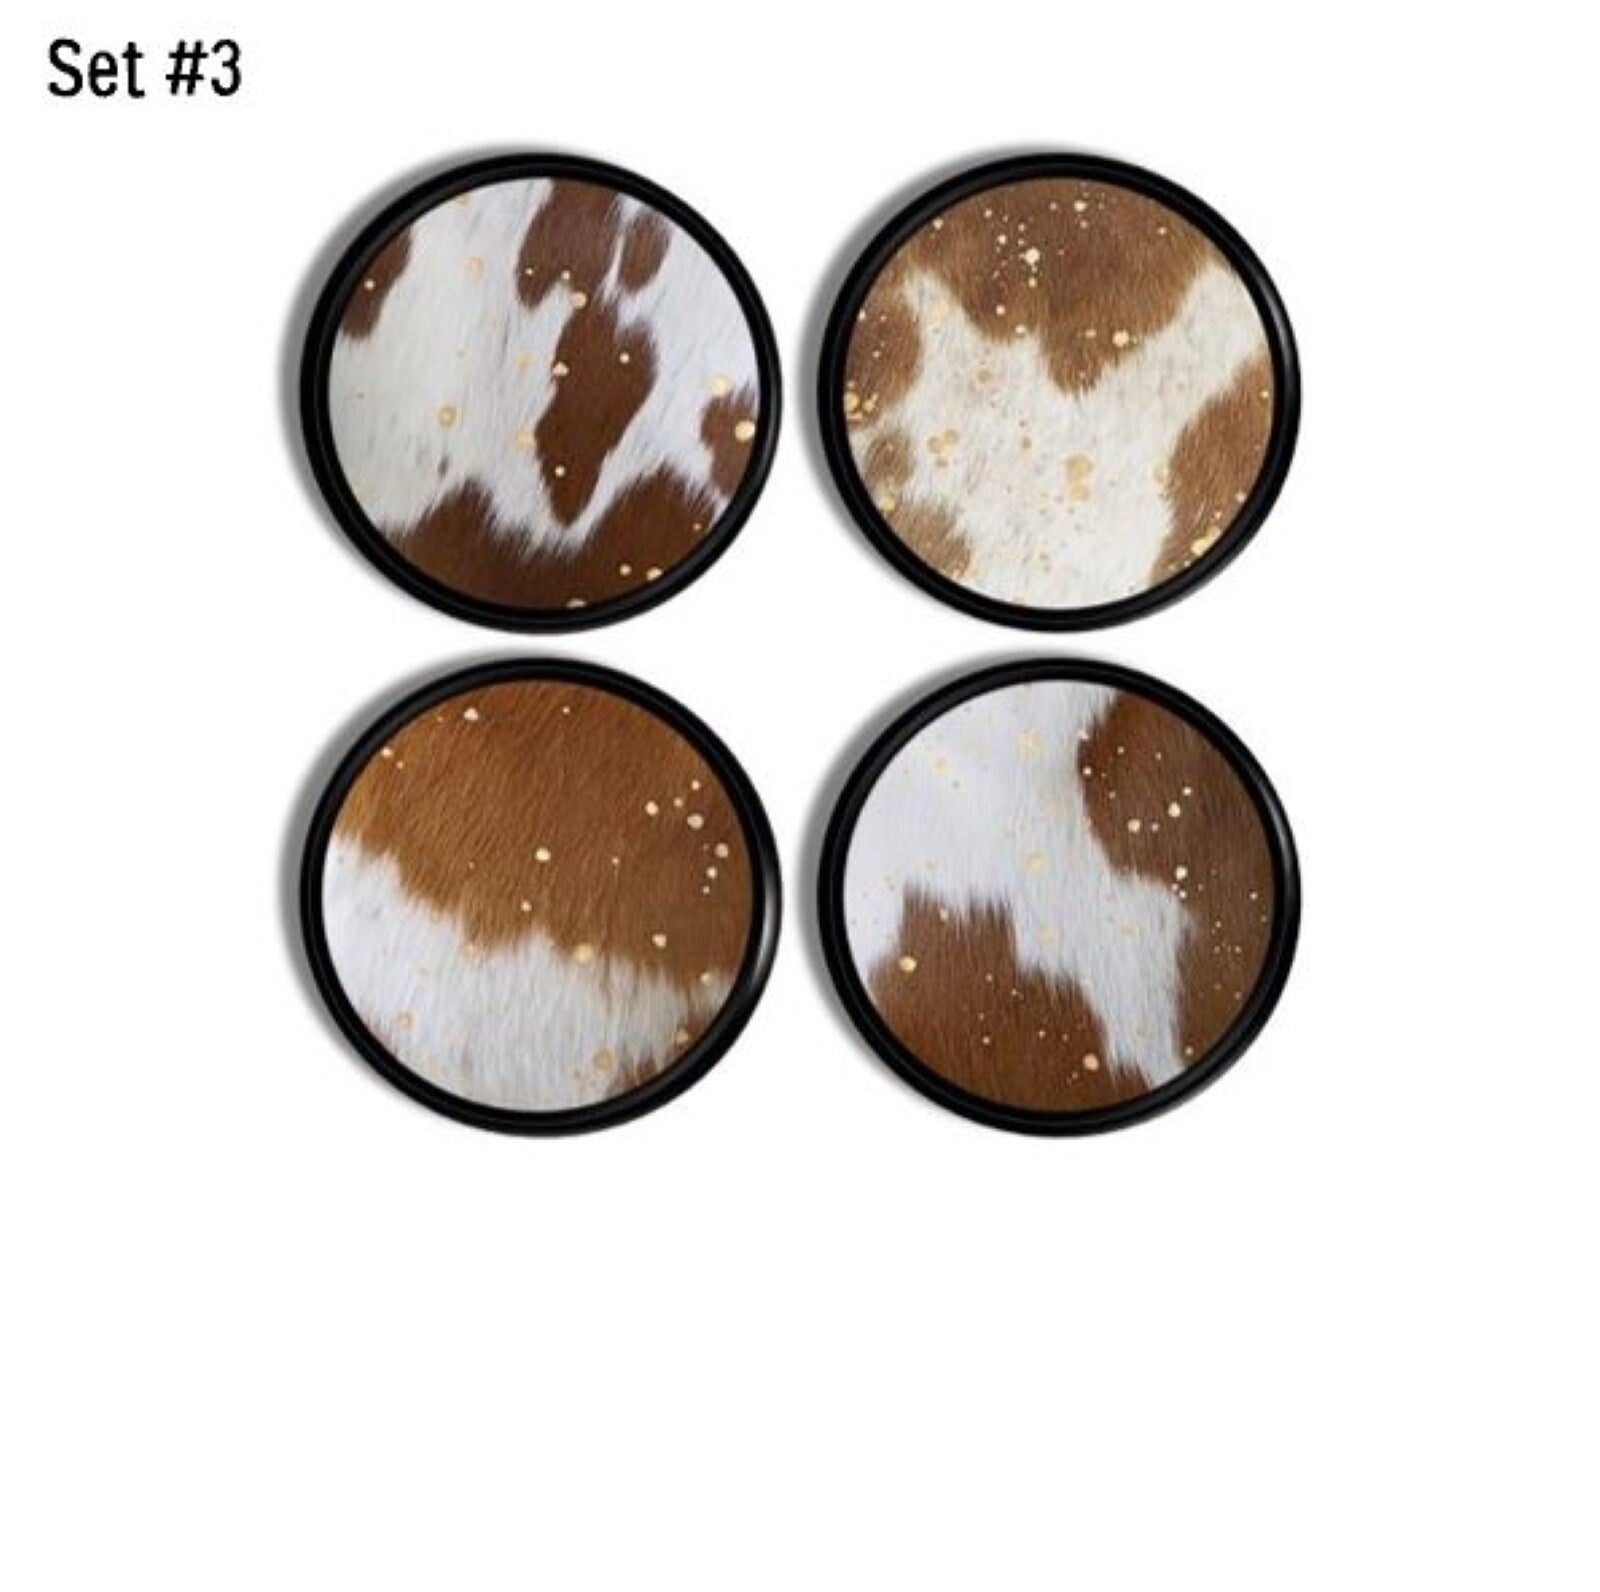 4 decorative cupboard knobs in a cow spot print with subtle gold specks on black base. Southwestern and country western decor.